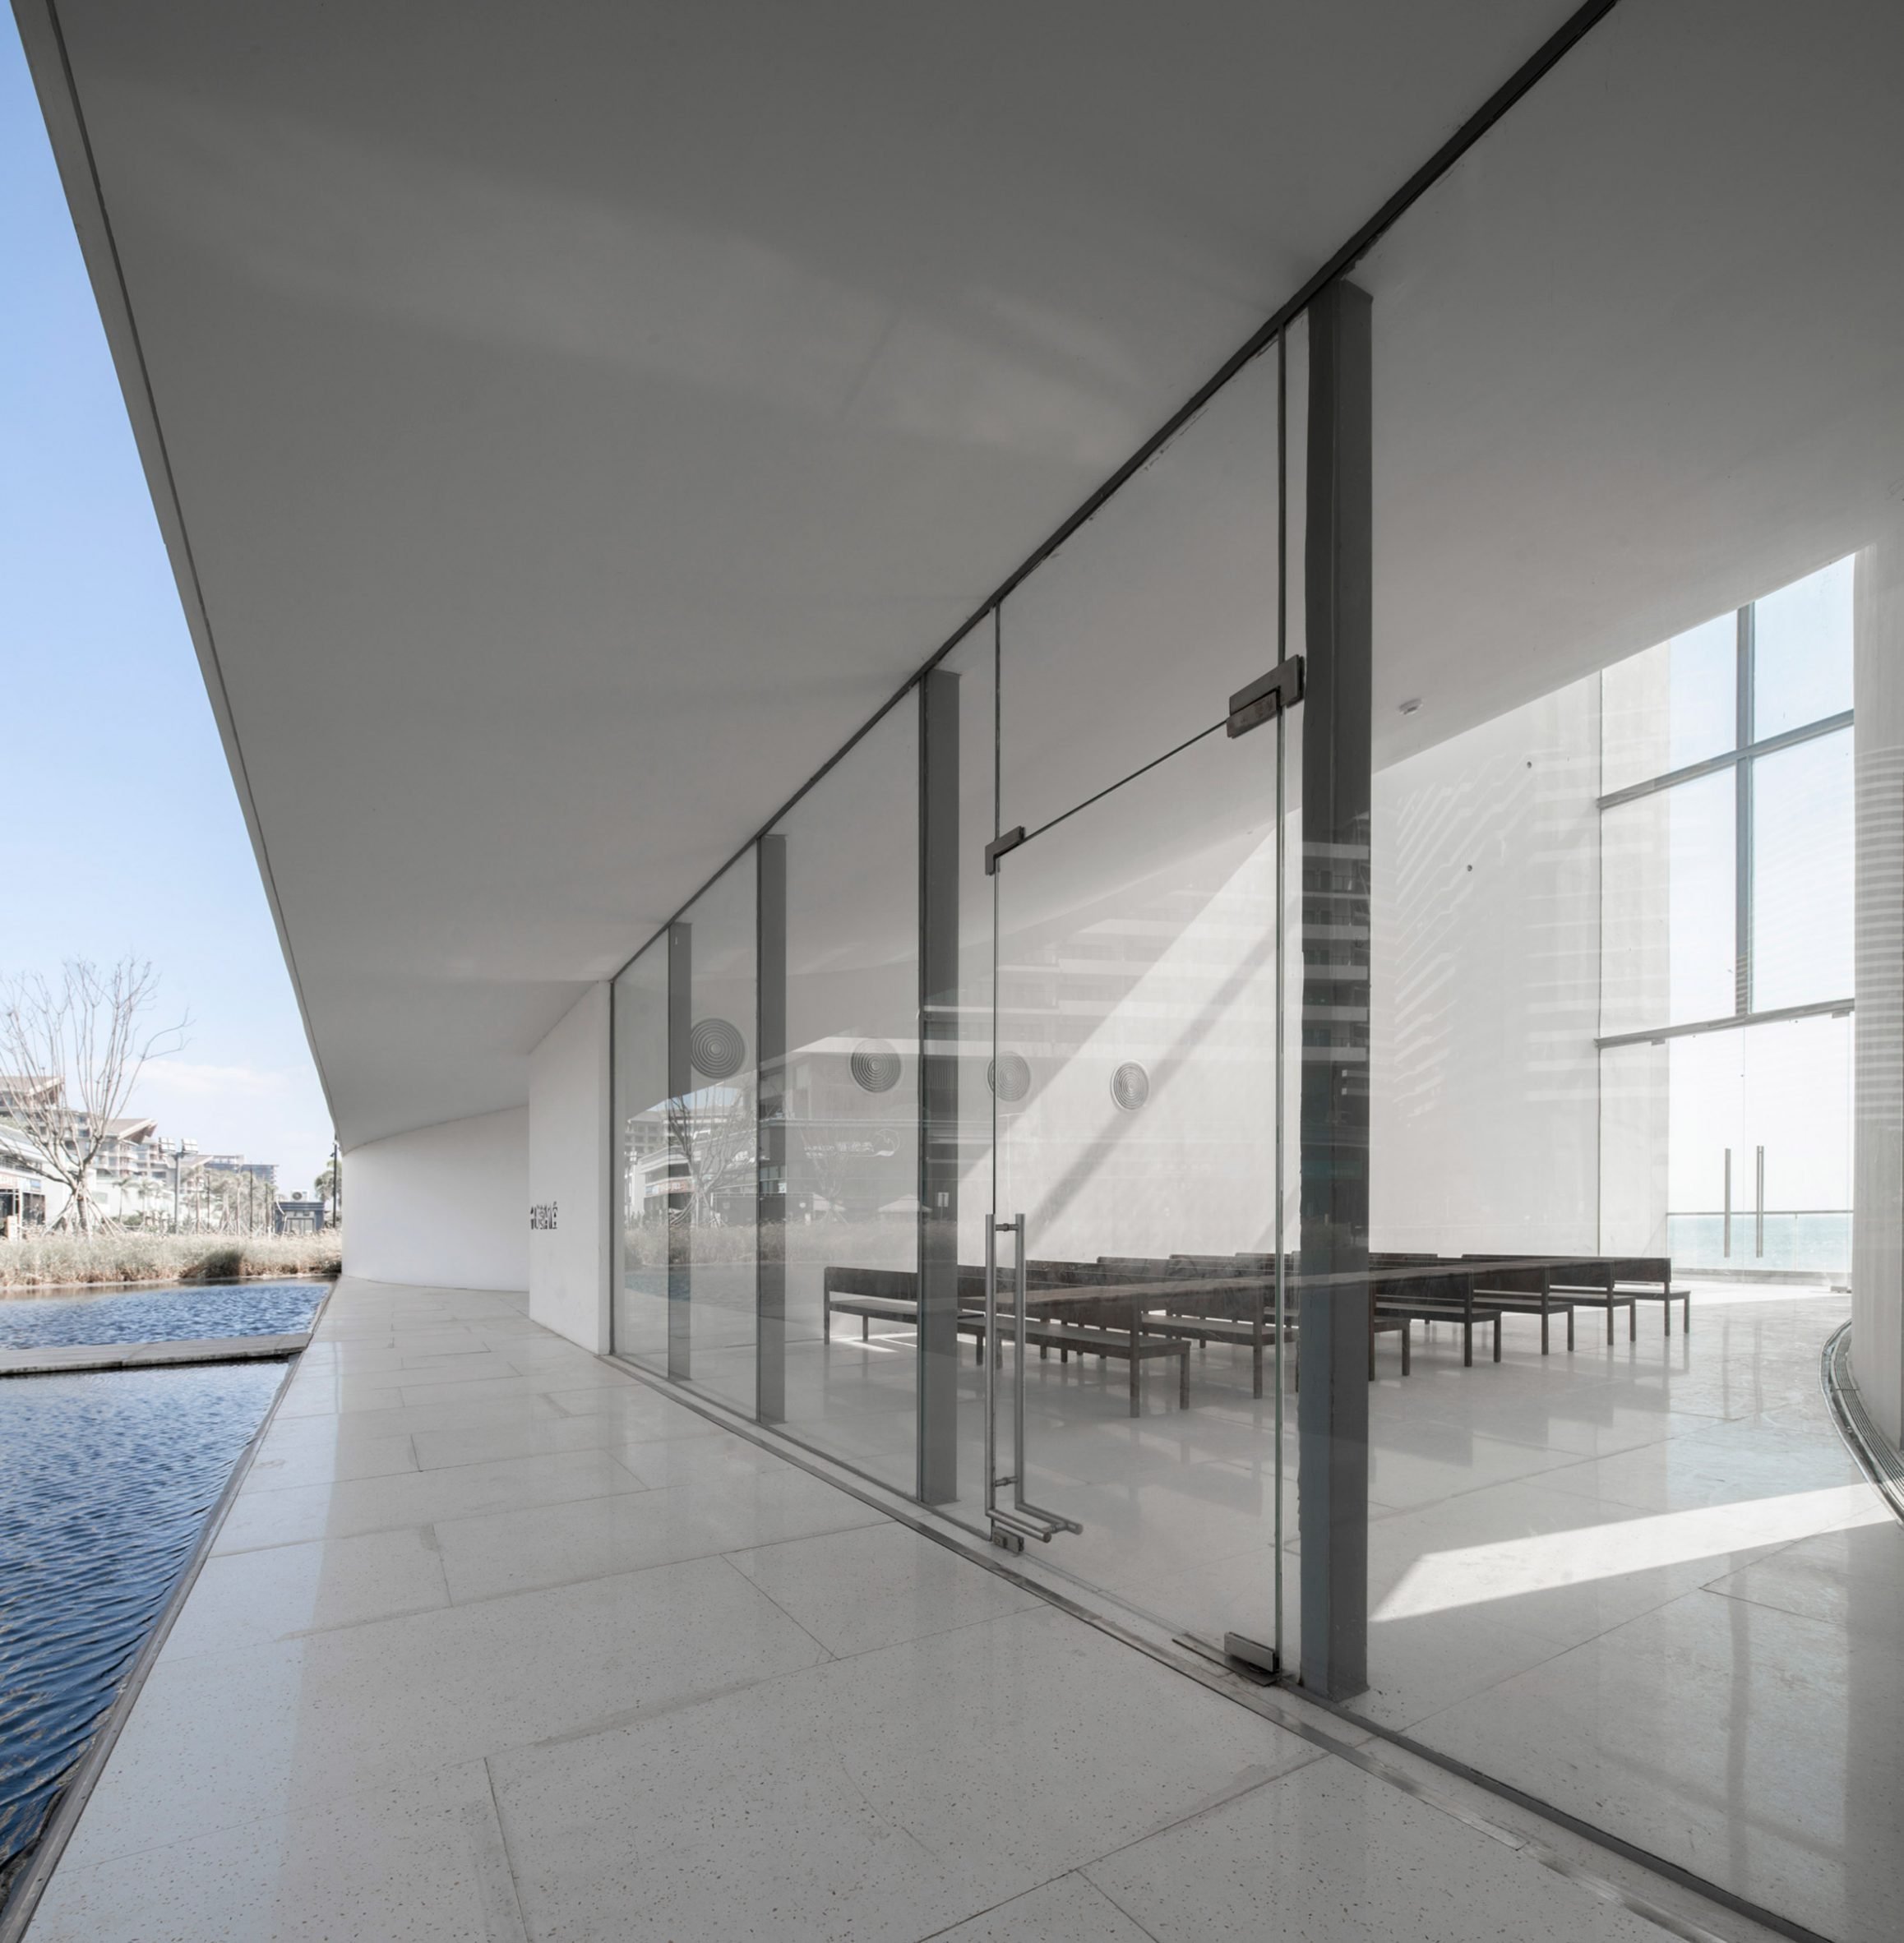 Glazed walls provide views out to the waterfront